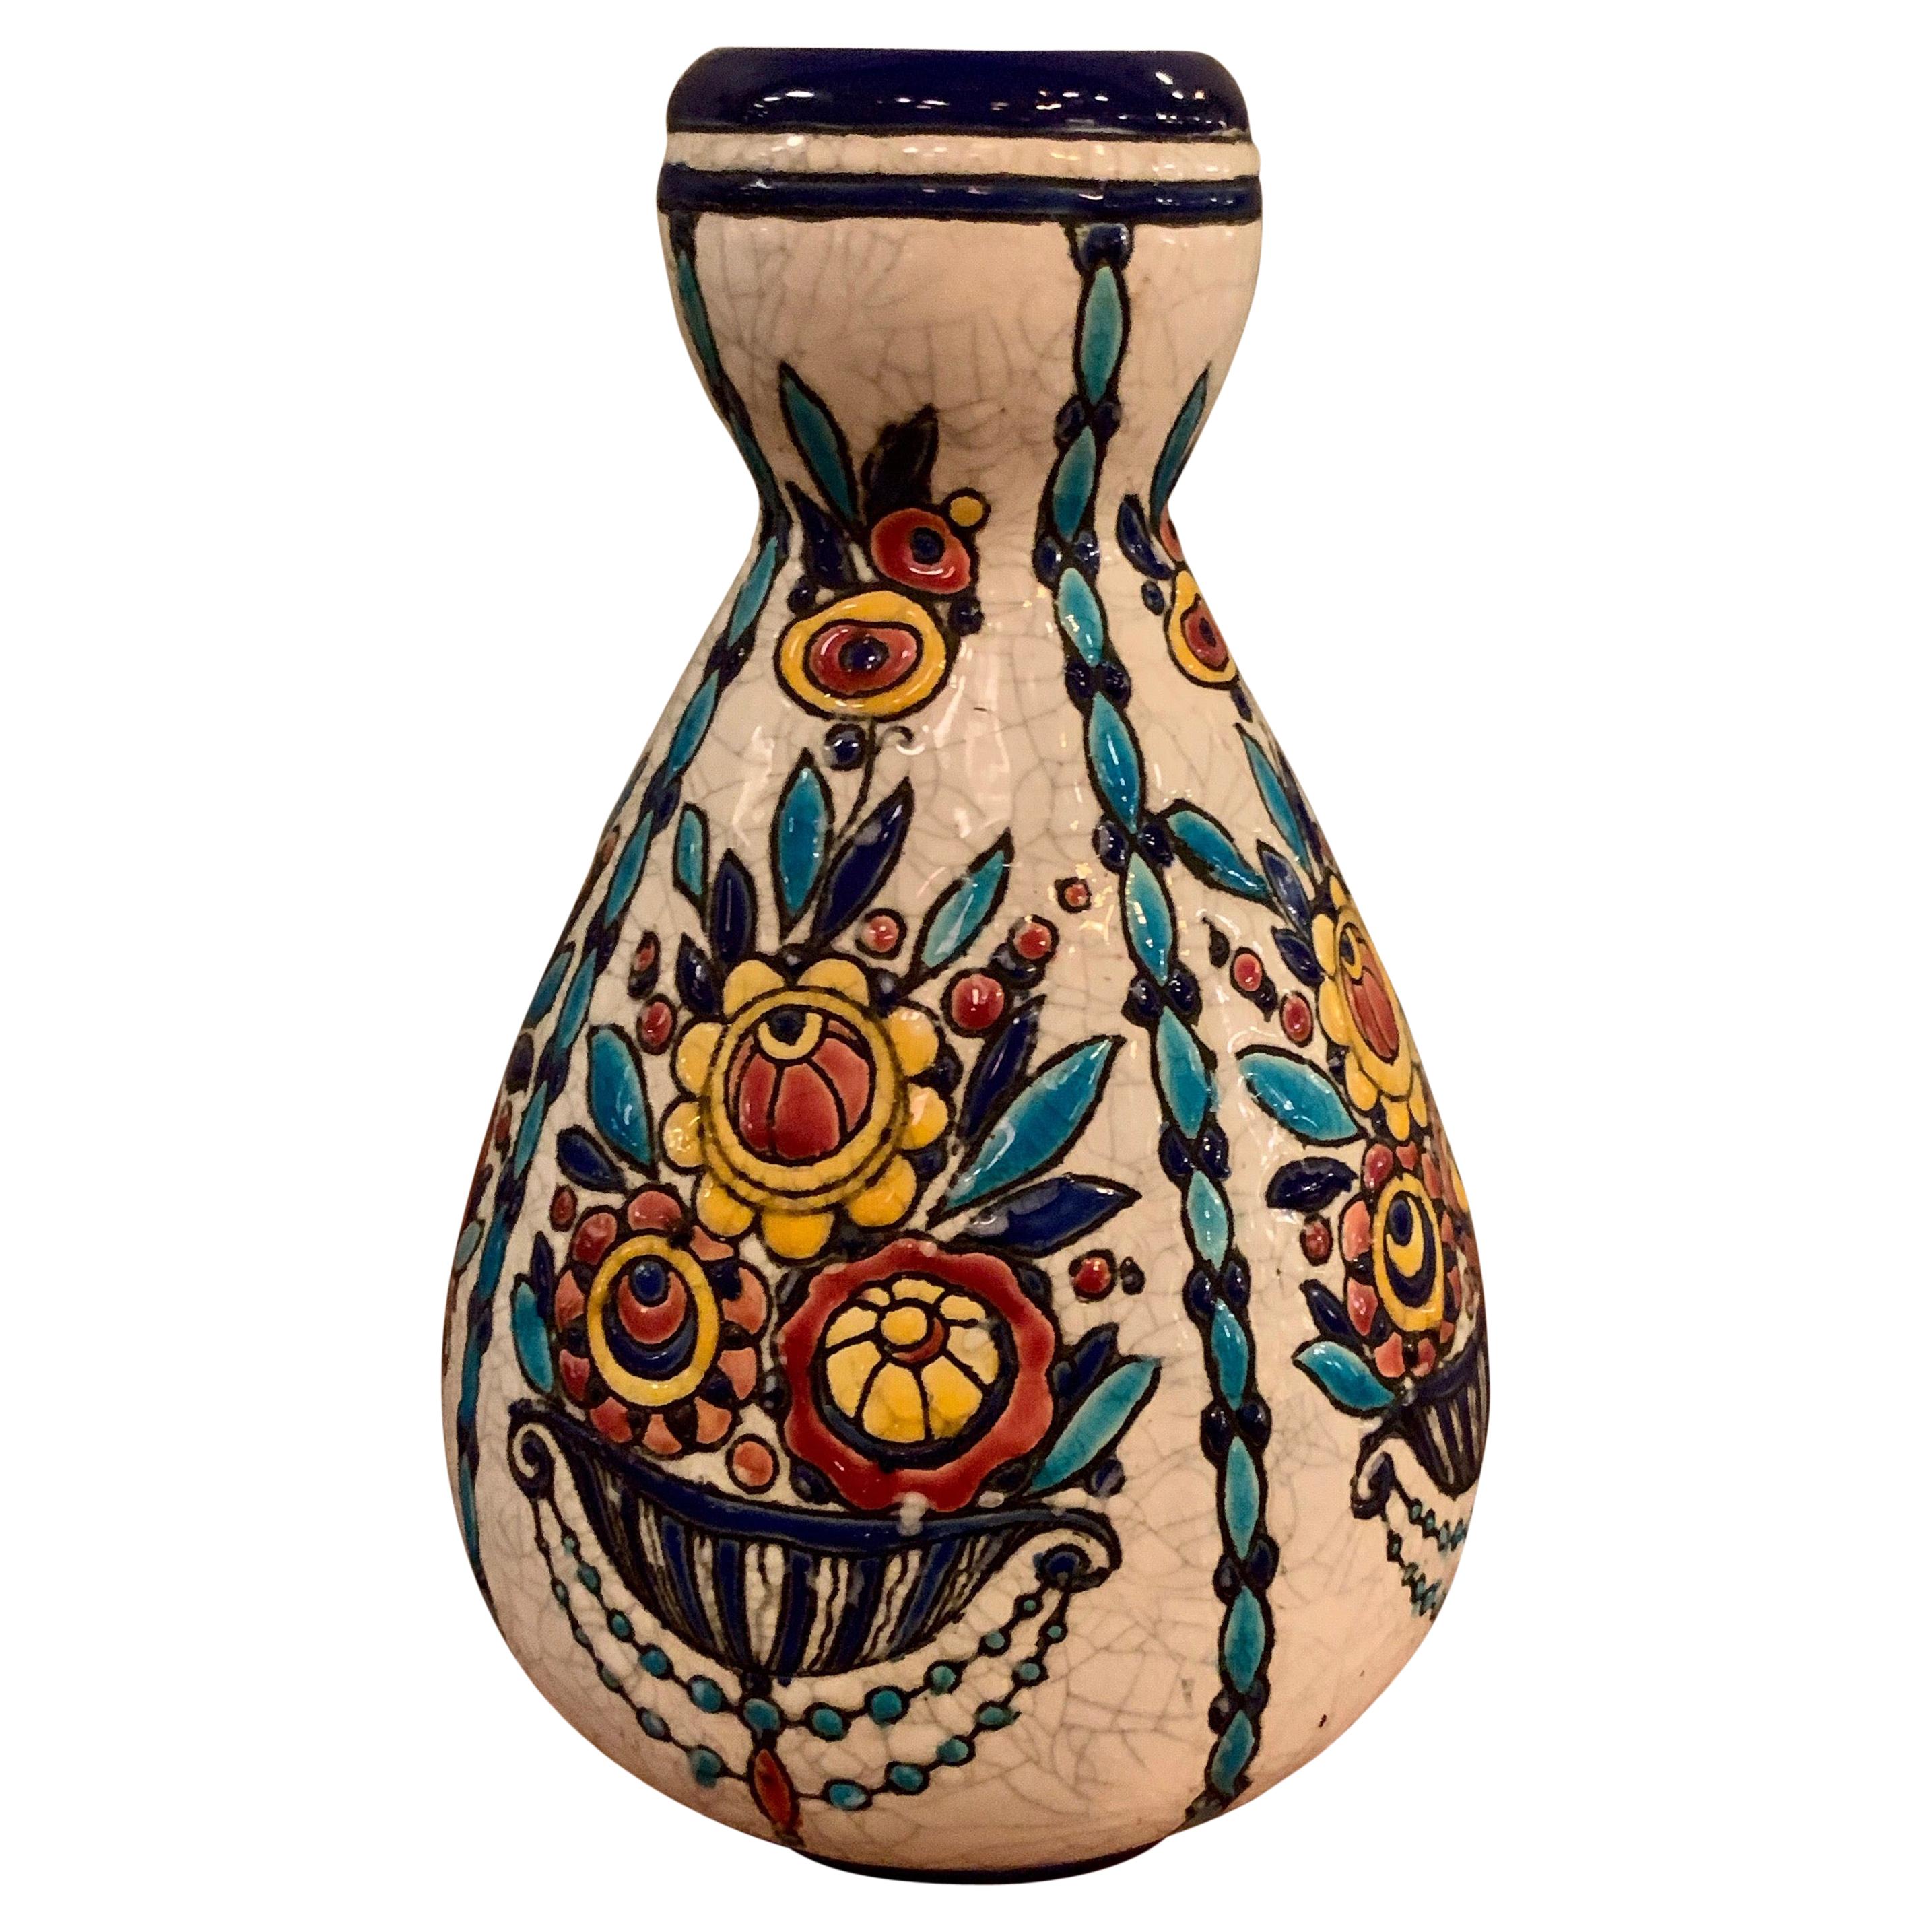 Art Deco Vase by Charles Catteau for Boch Frères Keramis